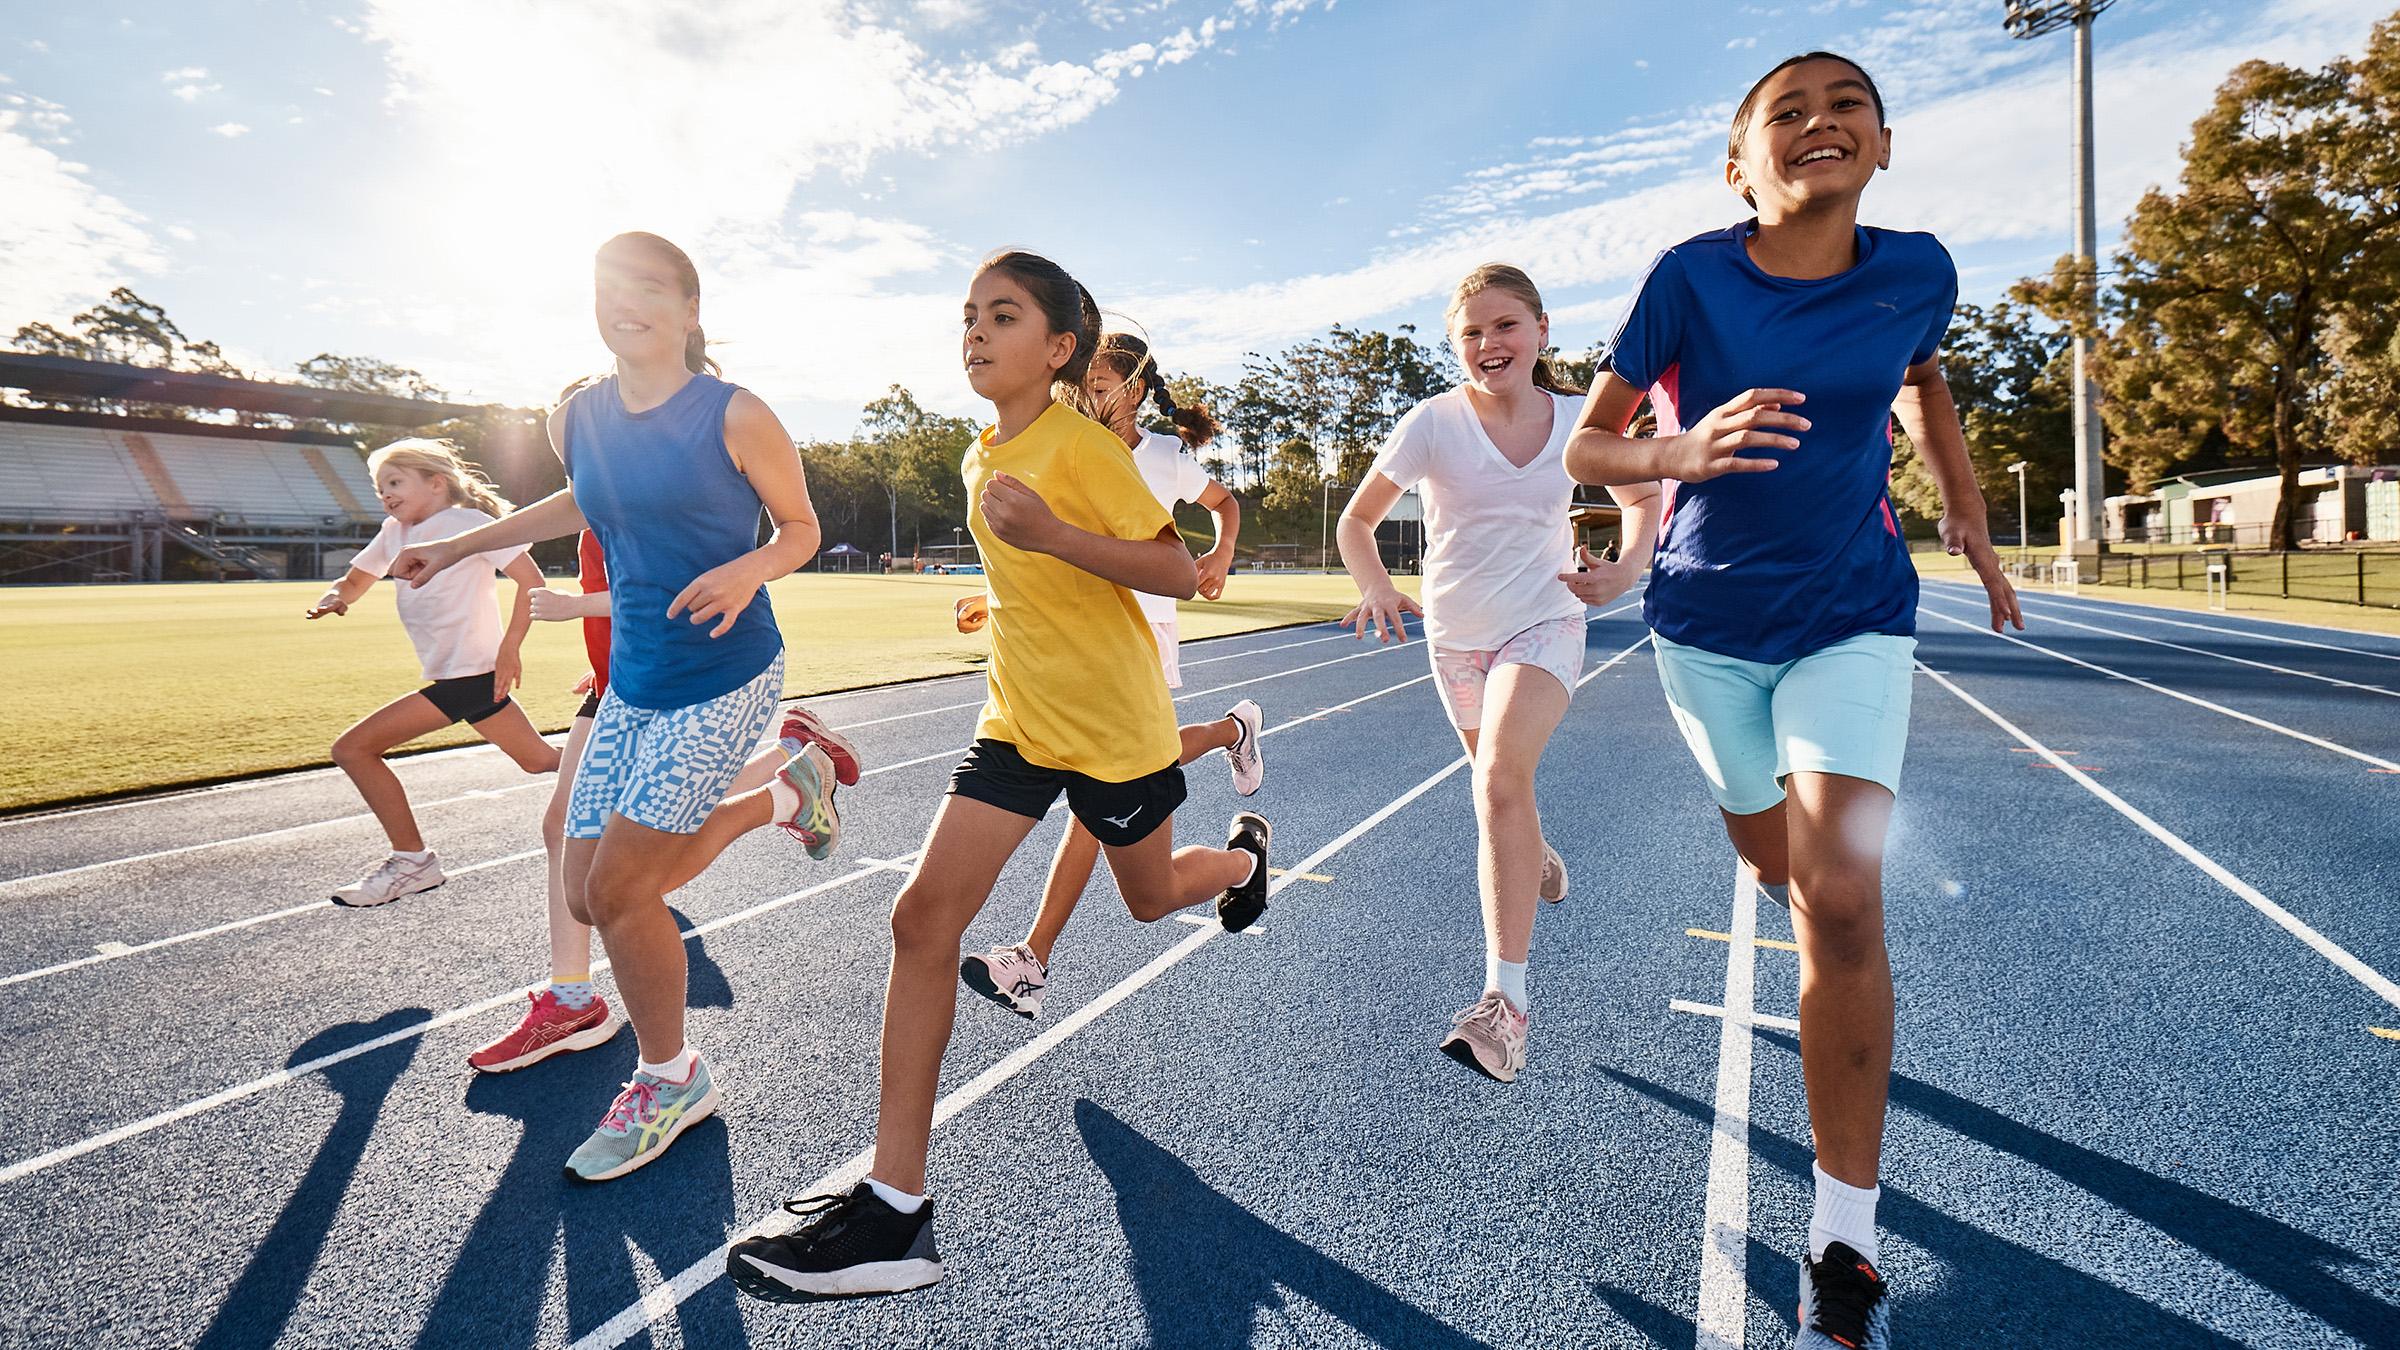 Children running on a blue athletics track on a sunny day